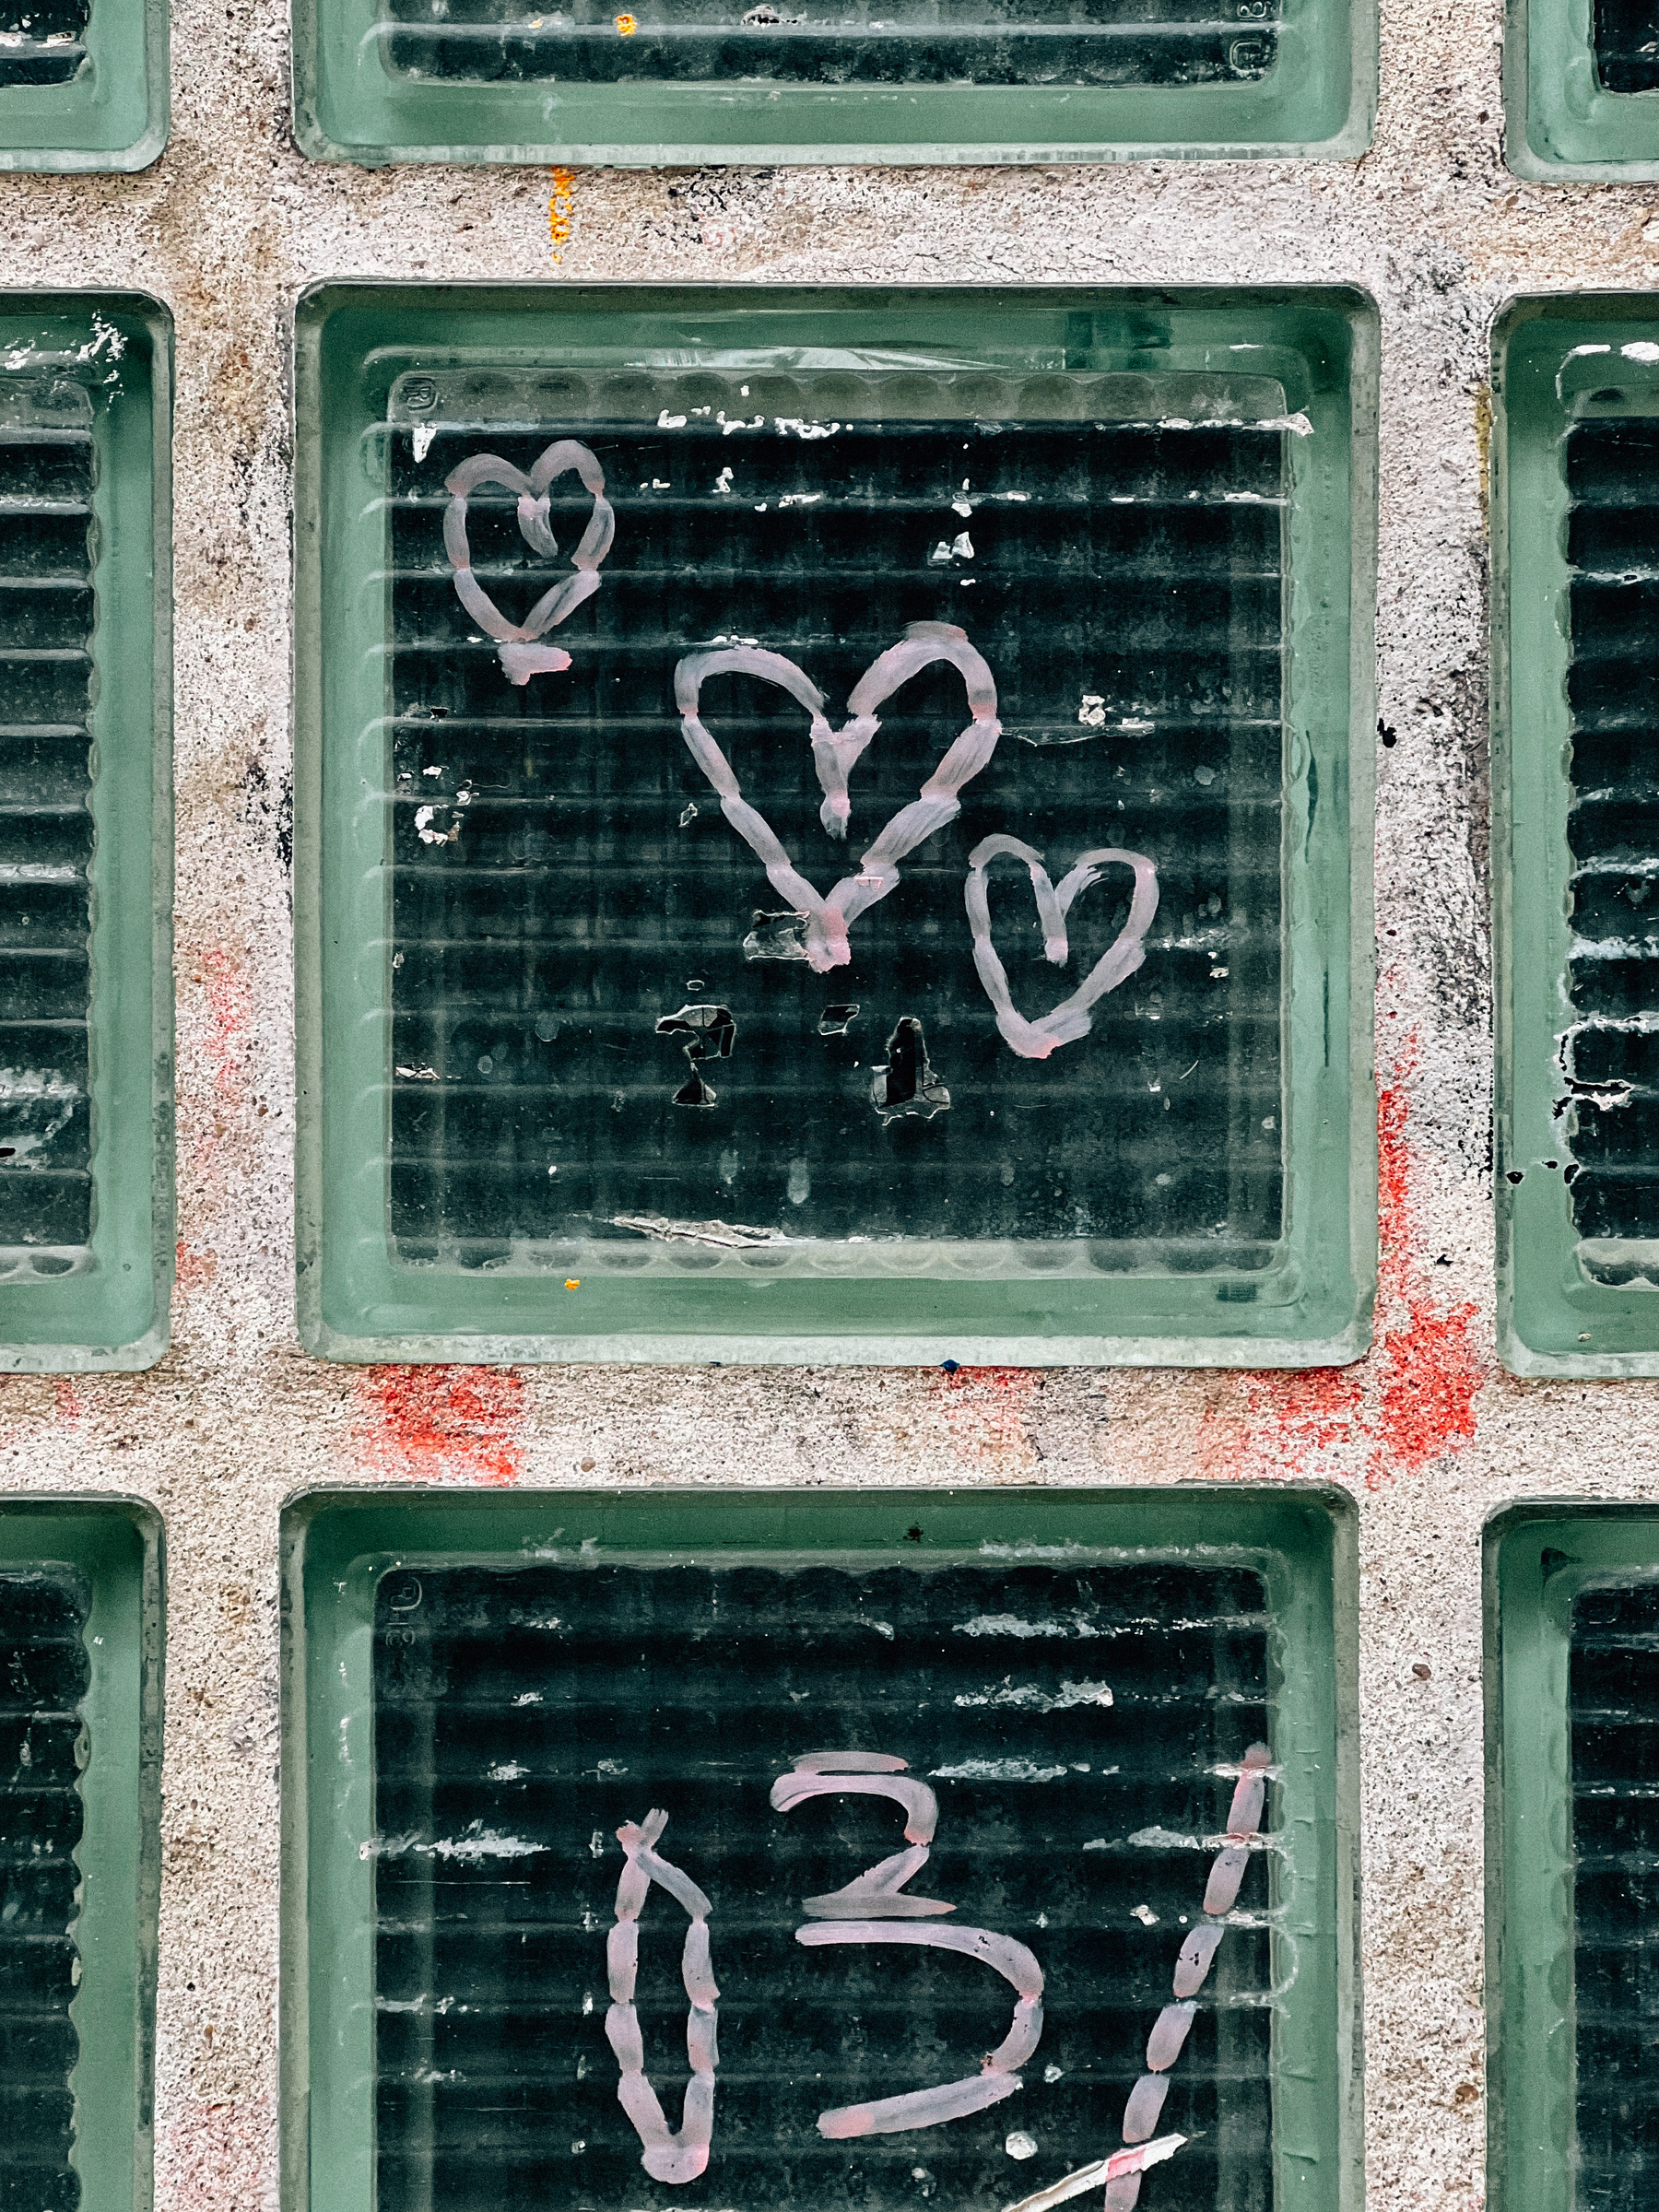 Glass blocks with graffiti painted hearts and the number 03.